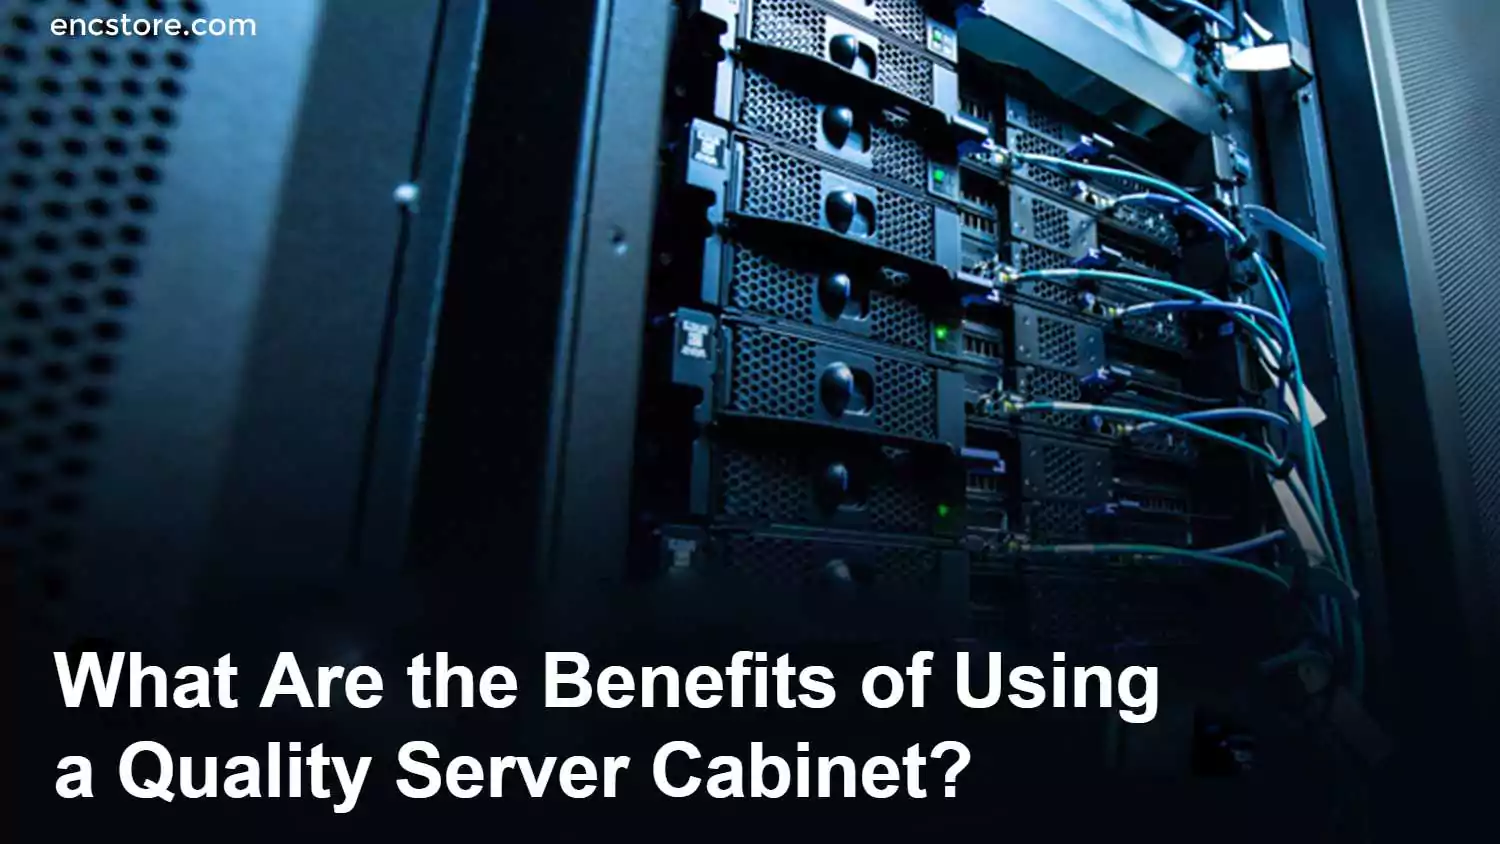 Benefits of Using a Quality Server Cabinet